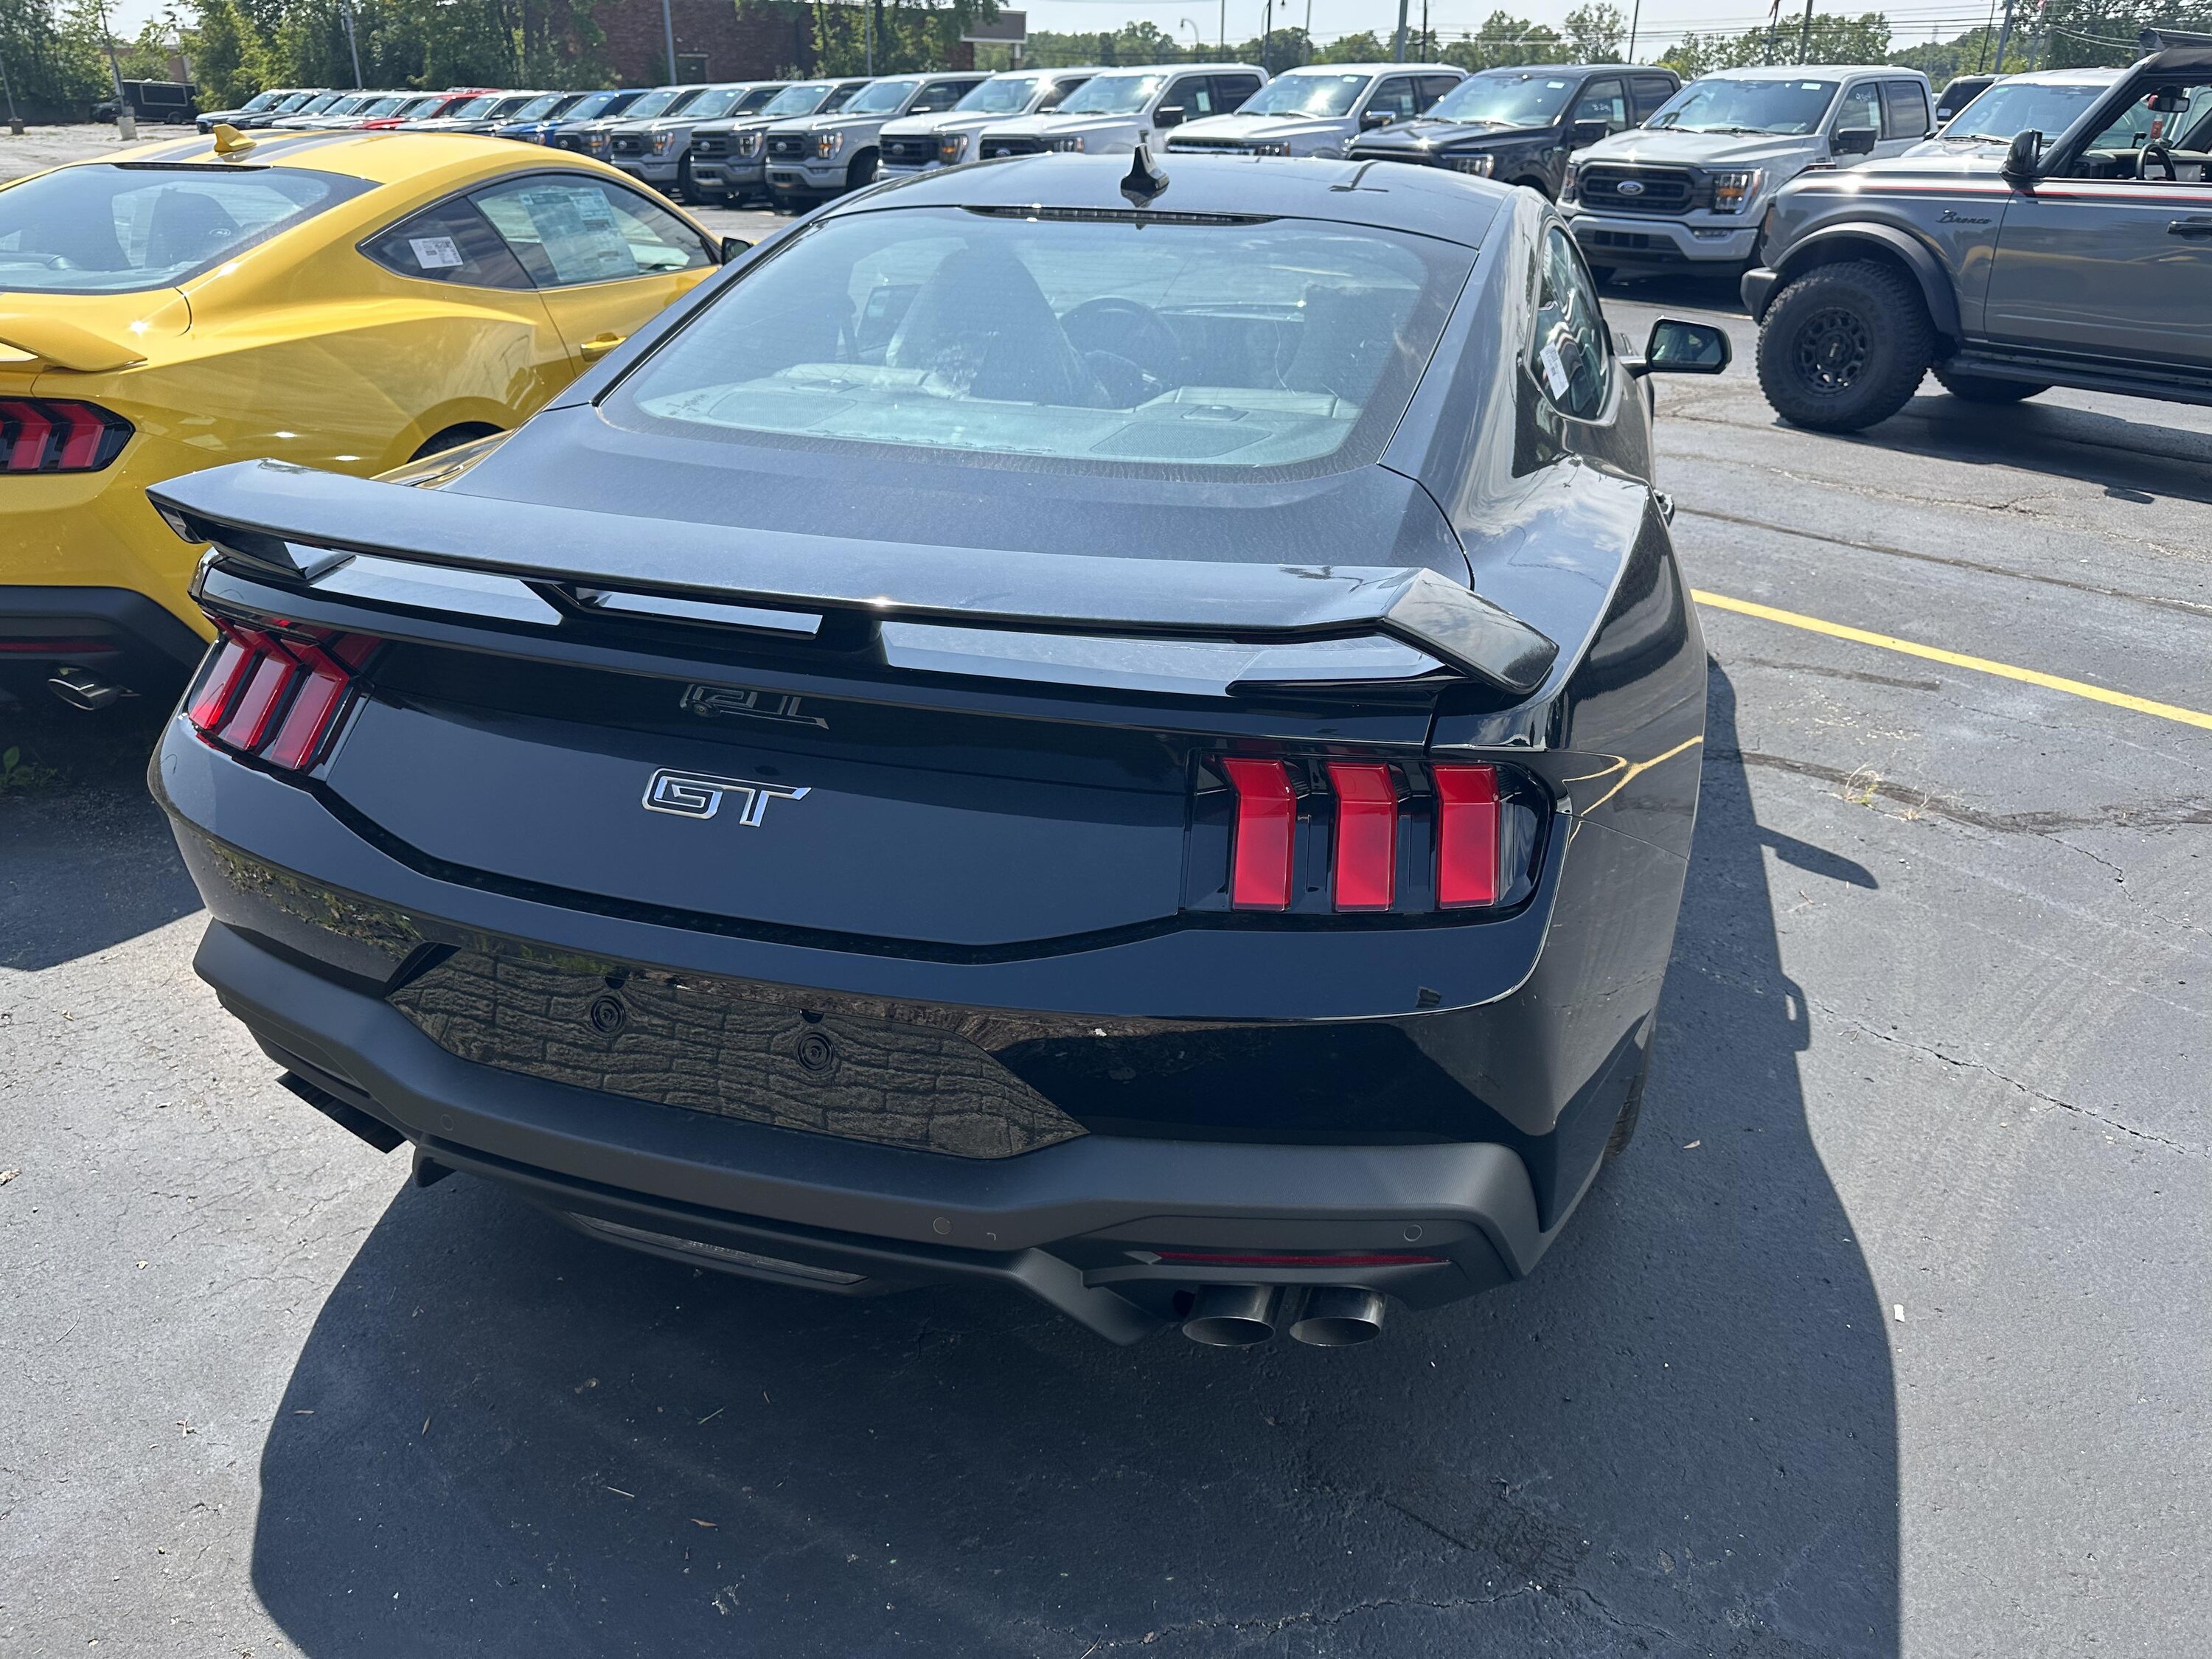 S650 Mustang Just picked up my Shadow Black GT 373040345_280593484709373_5561204761607210585_n